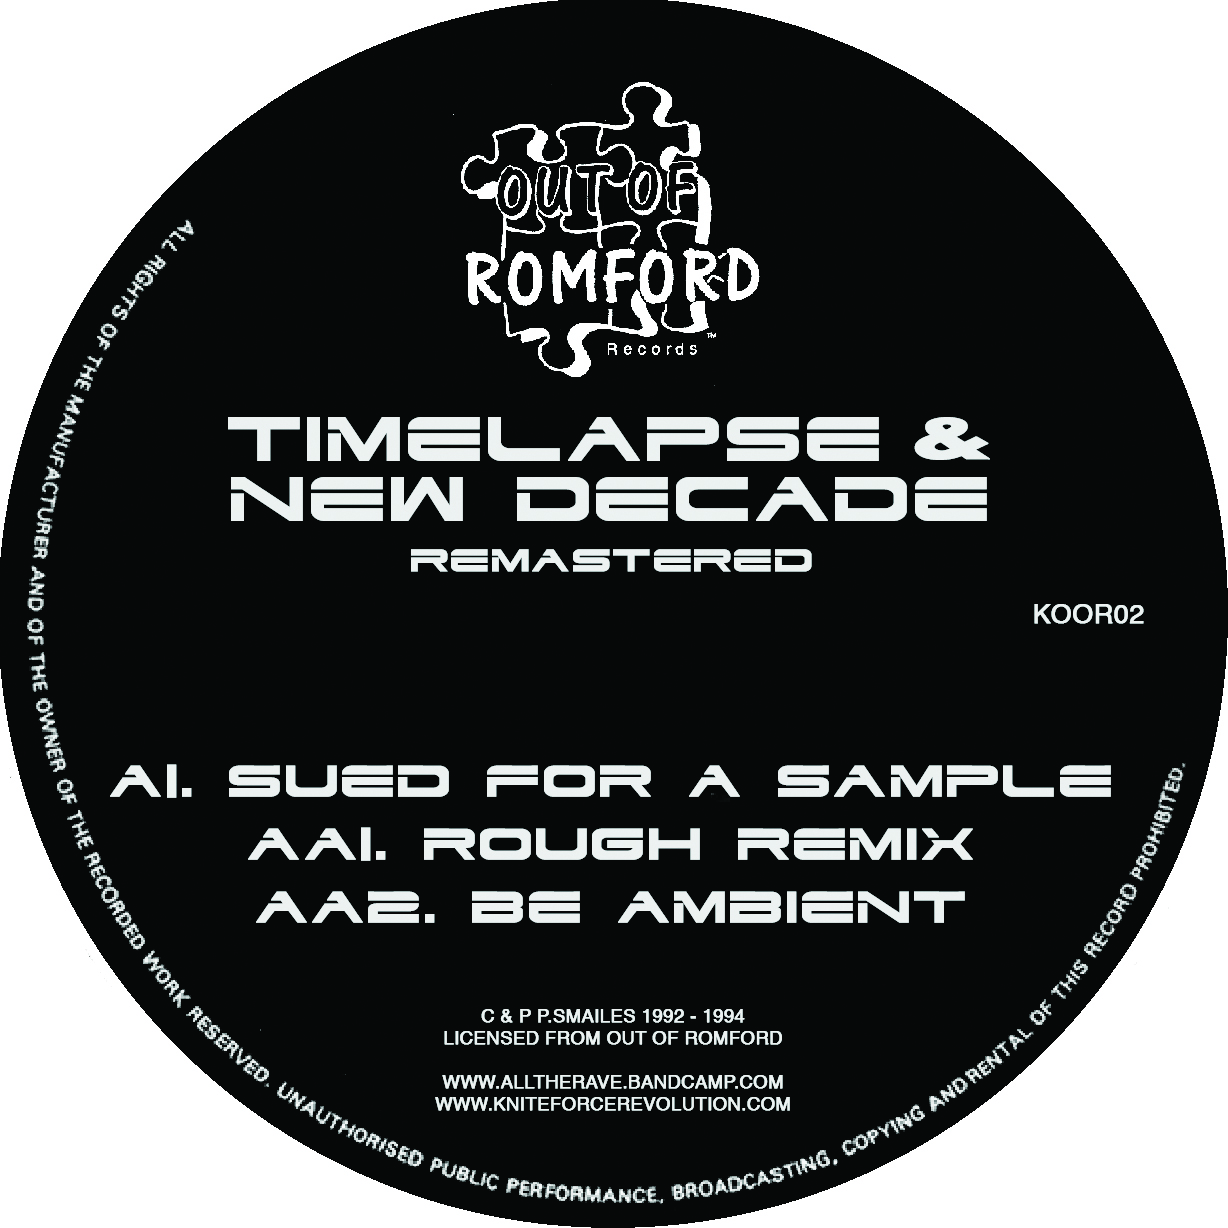 Art for Sued For A Sample (Remastered) by Timelapse & New Decade